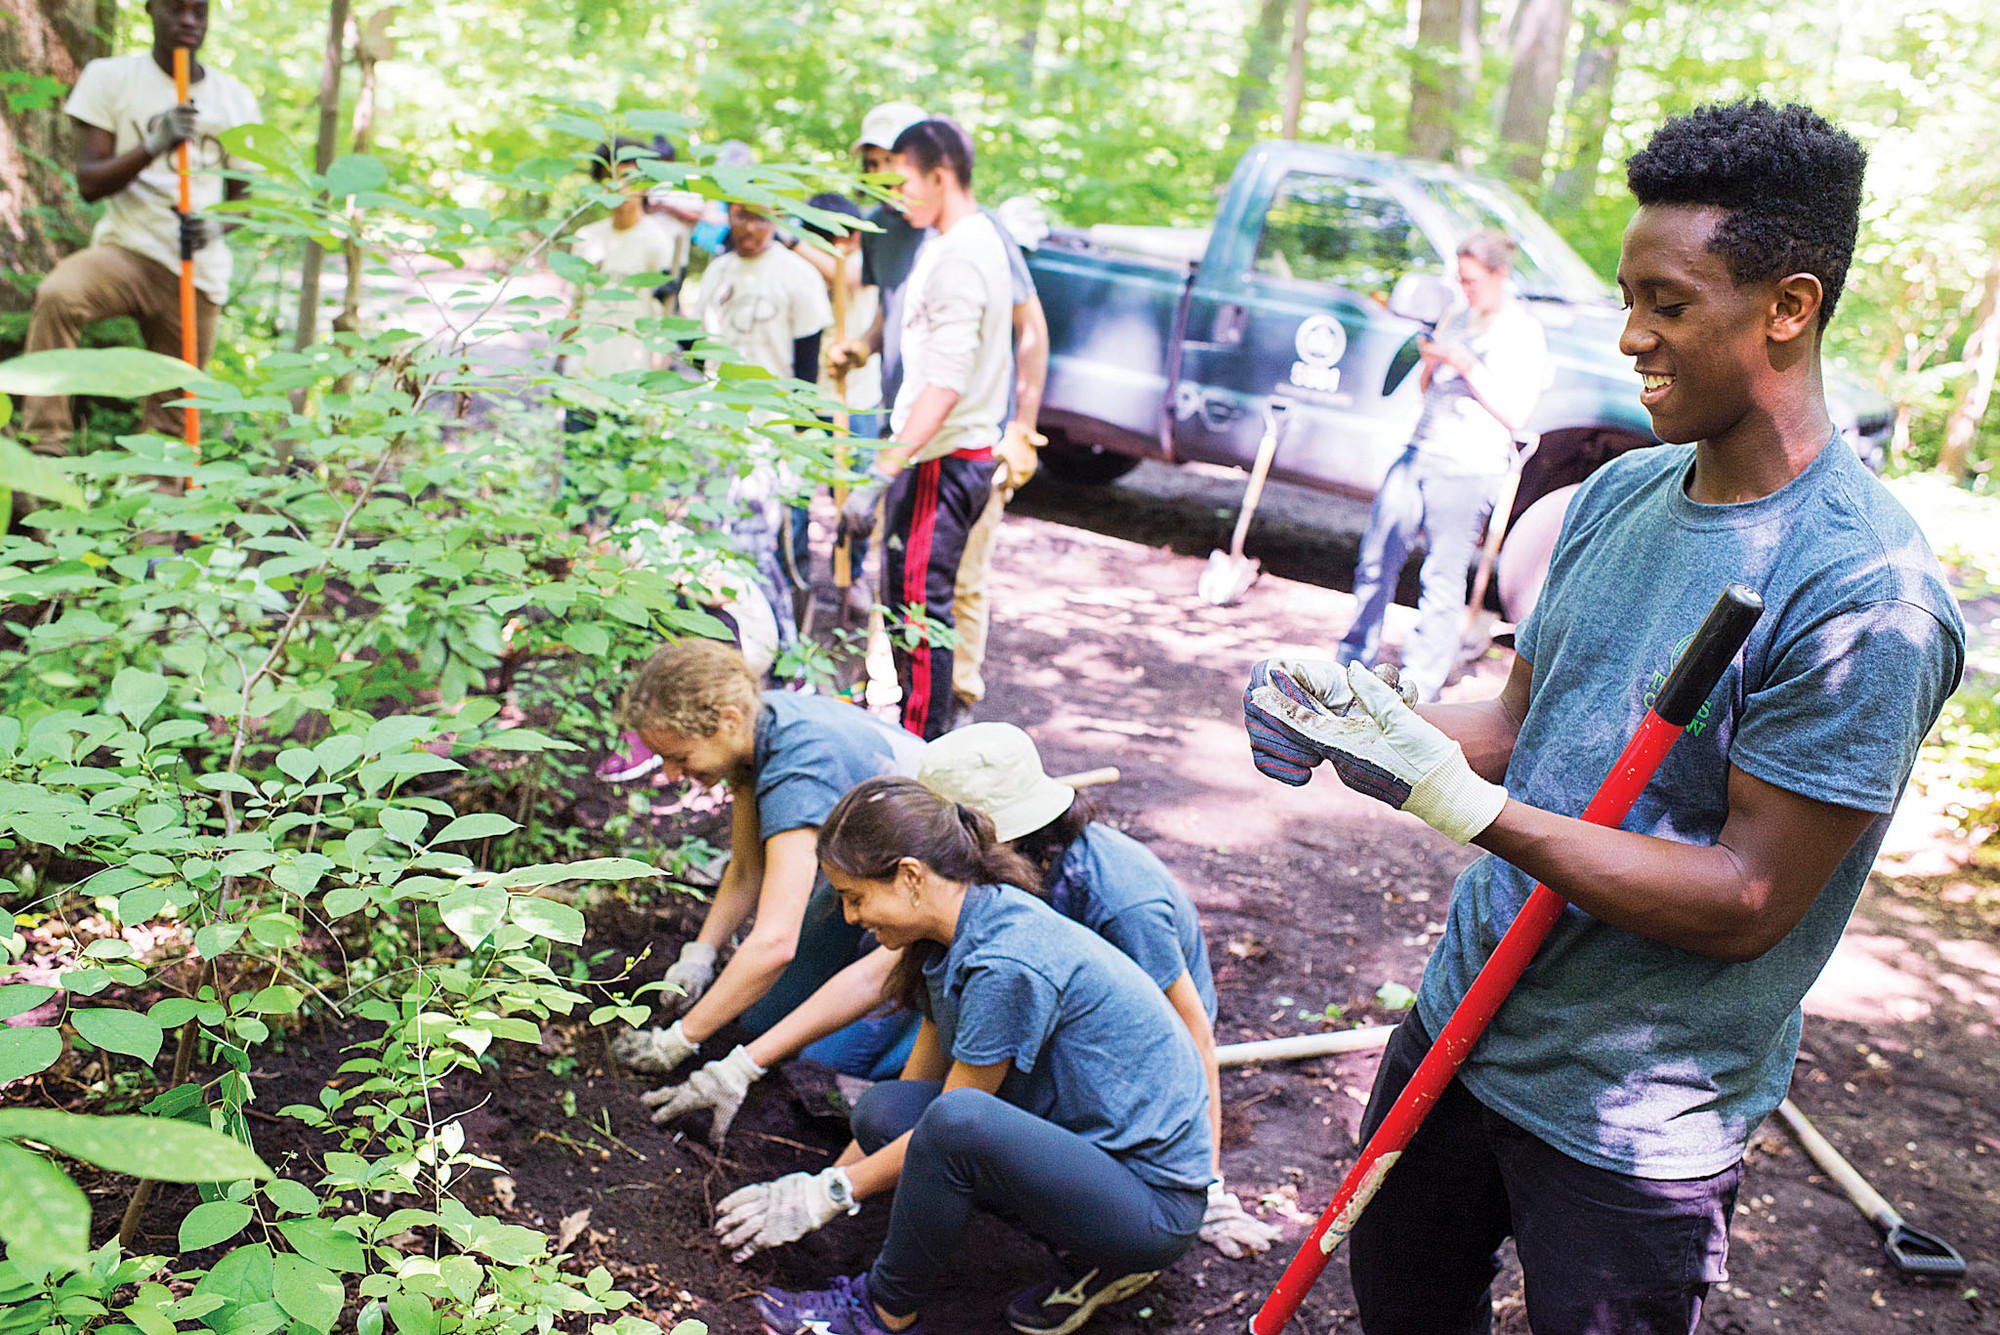 Kenyah Wiggins, a Truman High School student who lives in Coop City, helps to clear mud and weeds from an overgrown trail in Van Cortlandt Park on July 16.